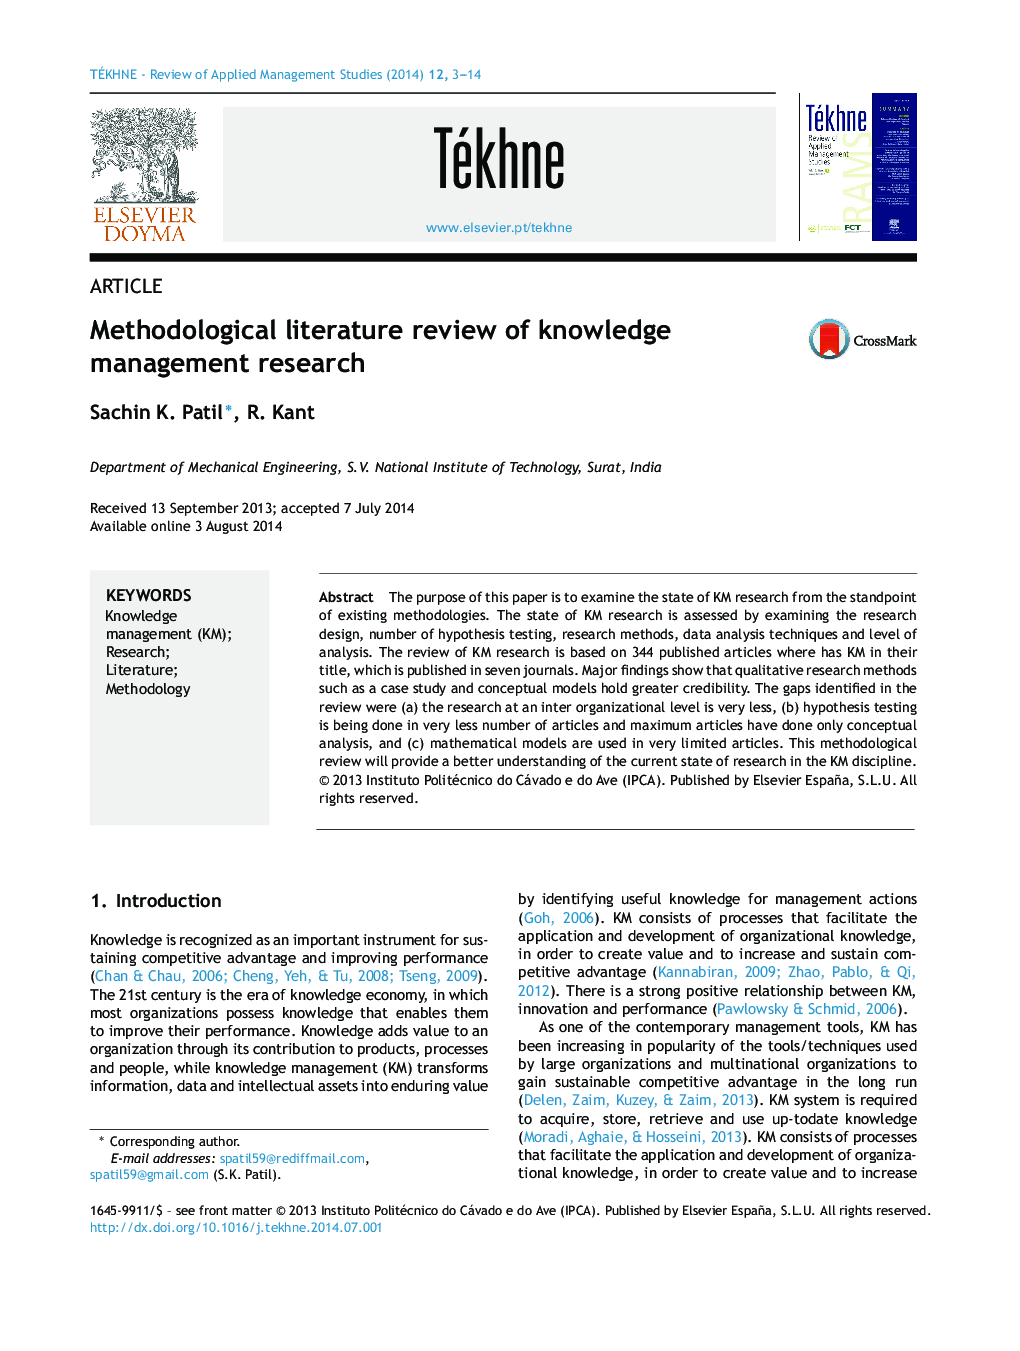 Methodological literature review of knowledge management research